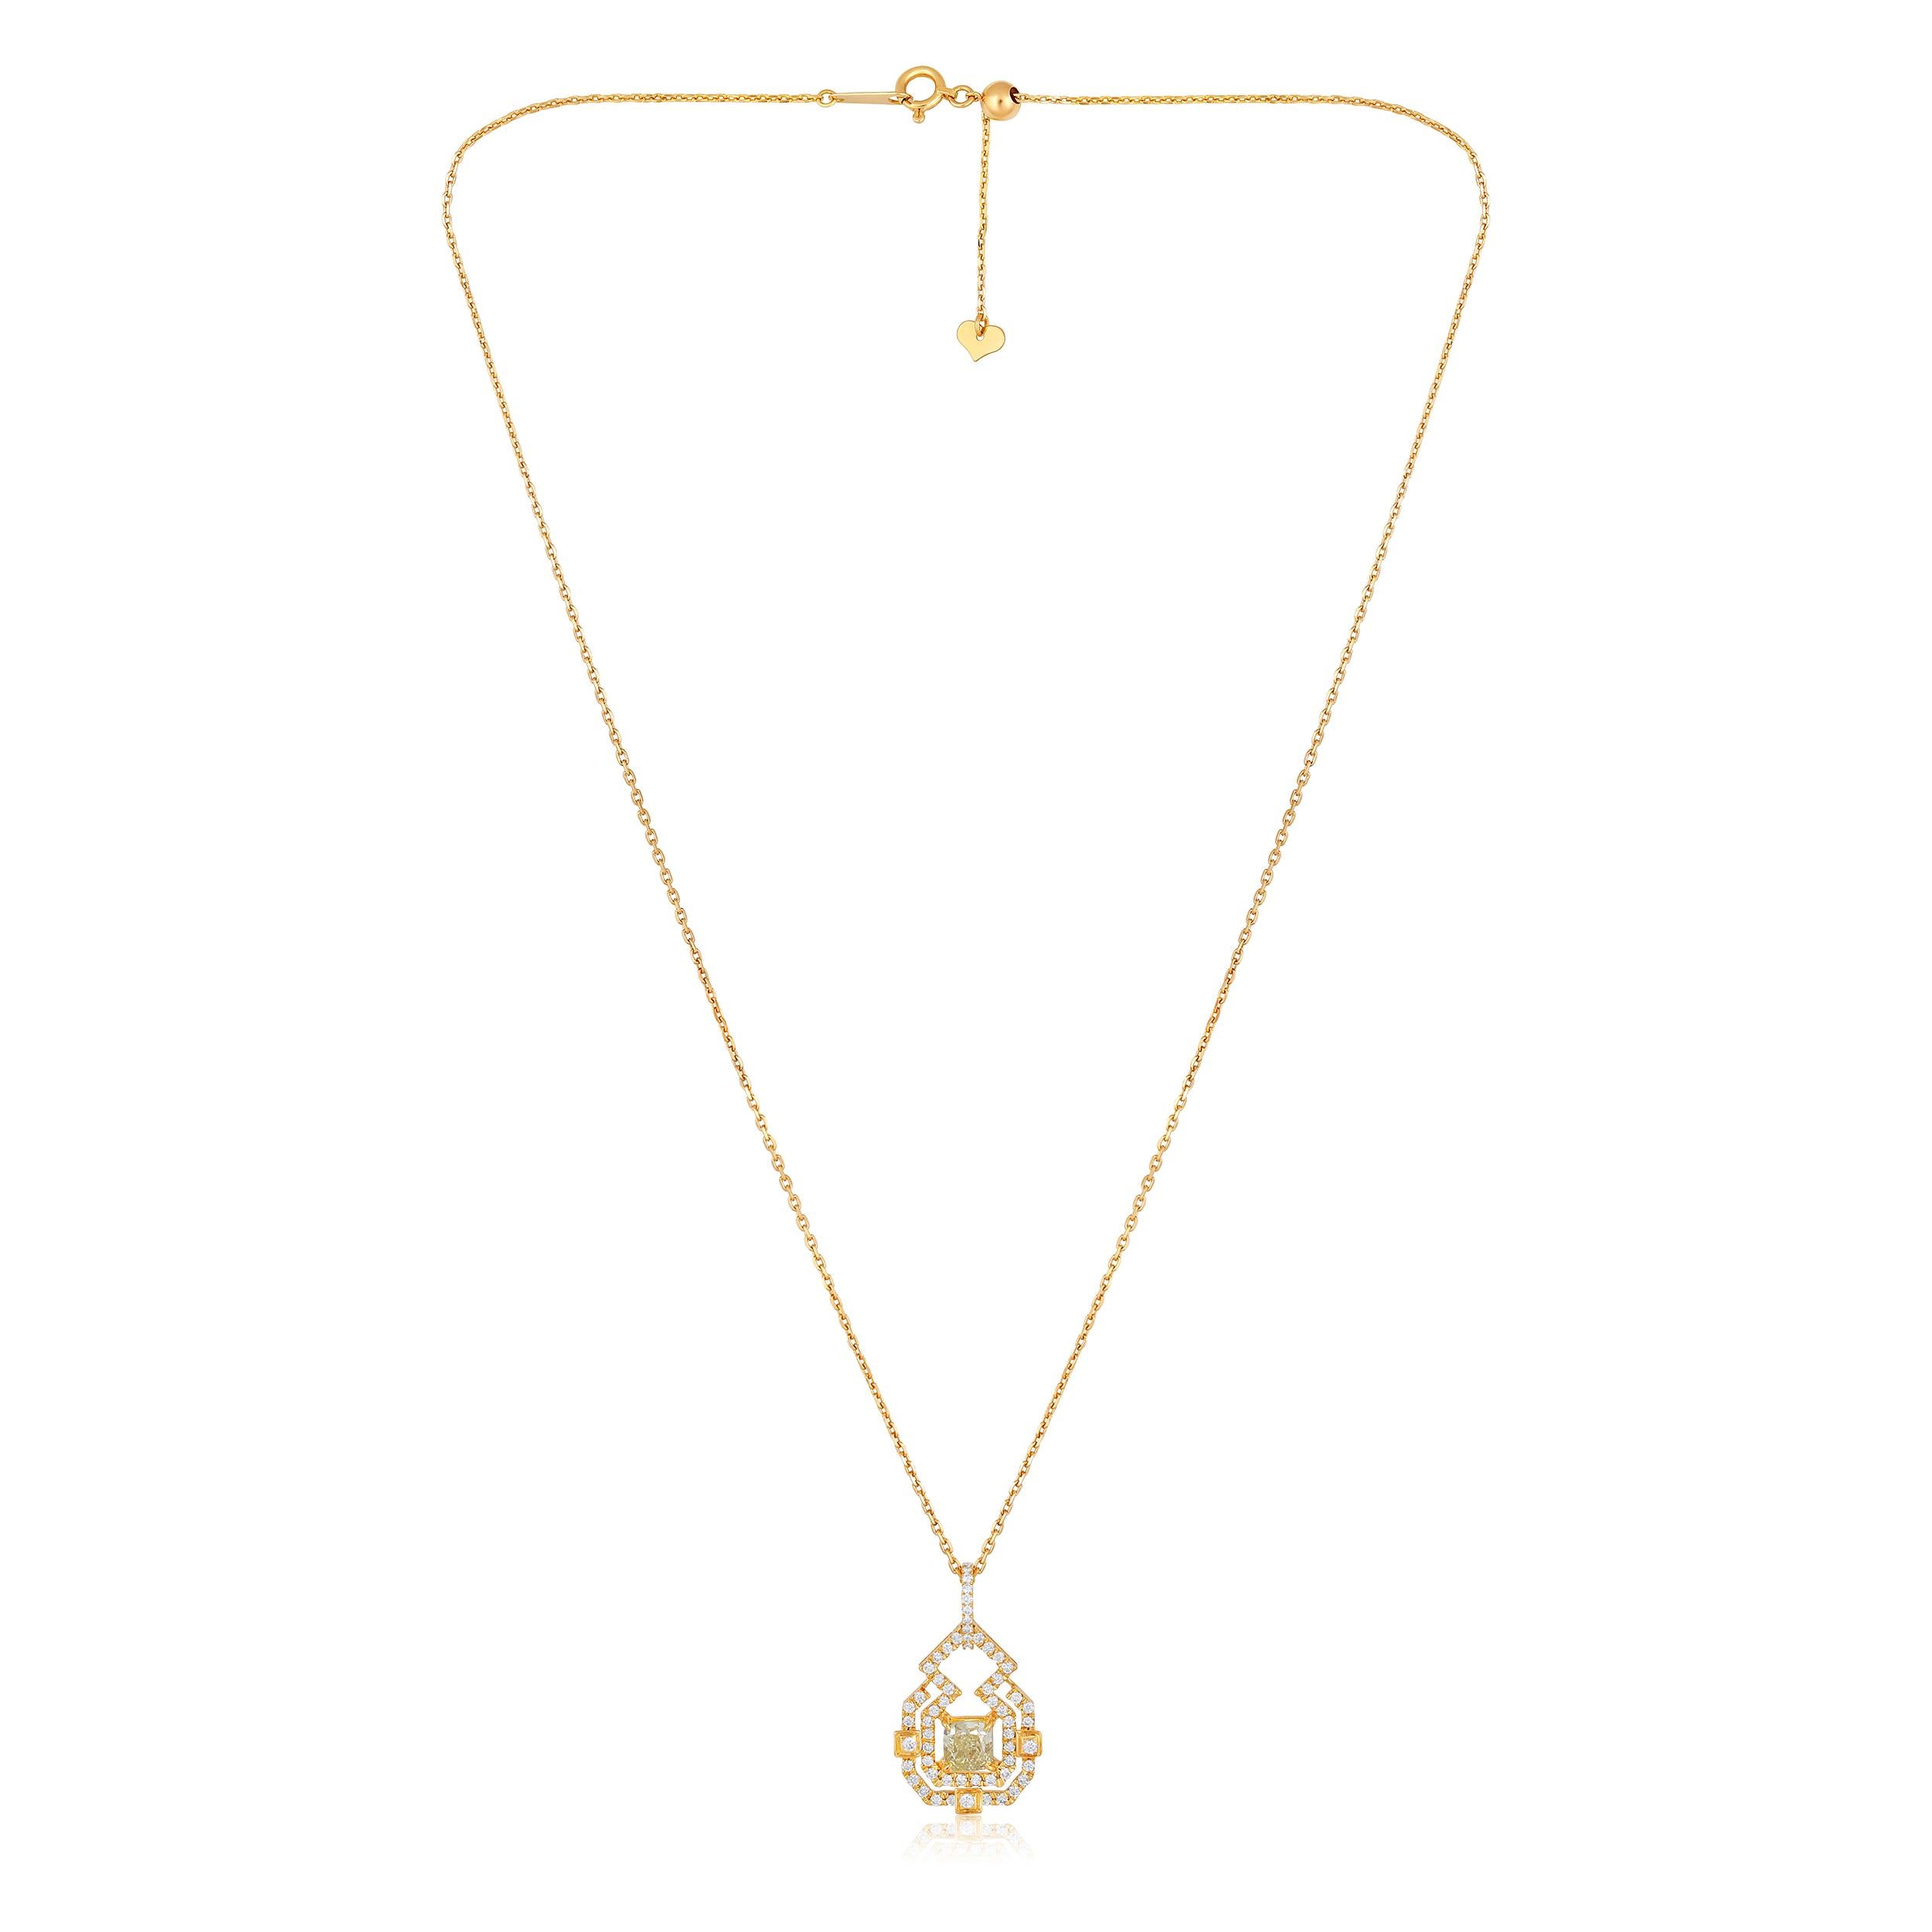 Crafted in 4.32 grams of 18K Yellow Gold, the necklace contains 58 stones of Rose Cut Natural Diamonds with a total of 0.35 carat in E-F color and VVS-VS clarity combined with 1 stone of Cushion Natural Diamond with a total of 0.83 carat. The